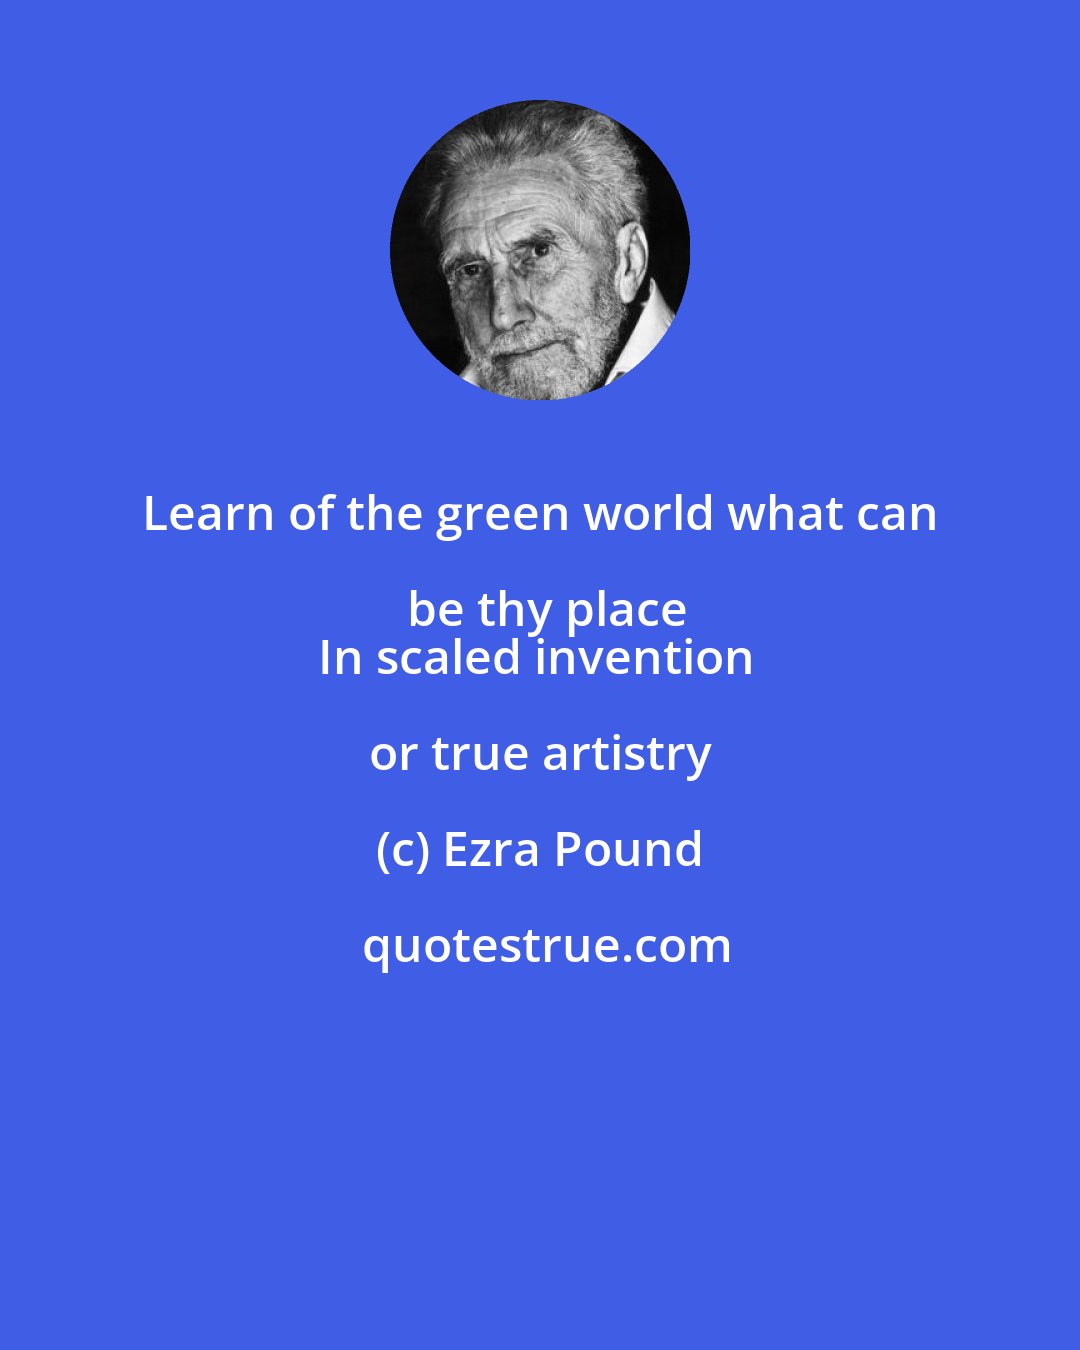 Ezra Pound: Learn of the green world what can be thy place
In scaled invention or true artistry